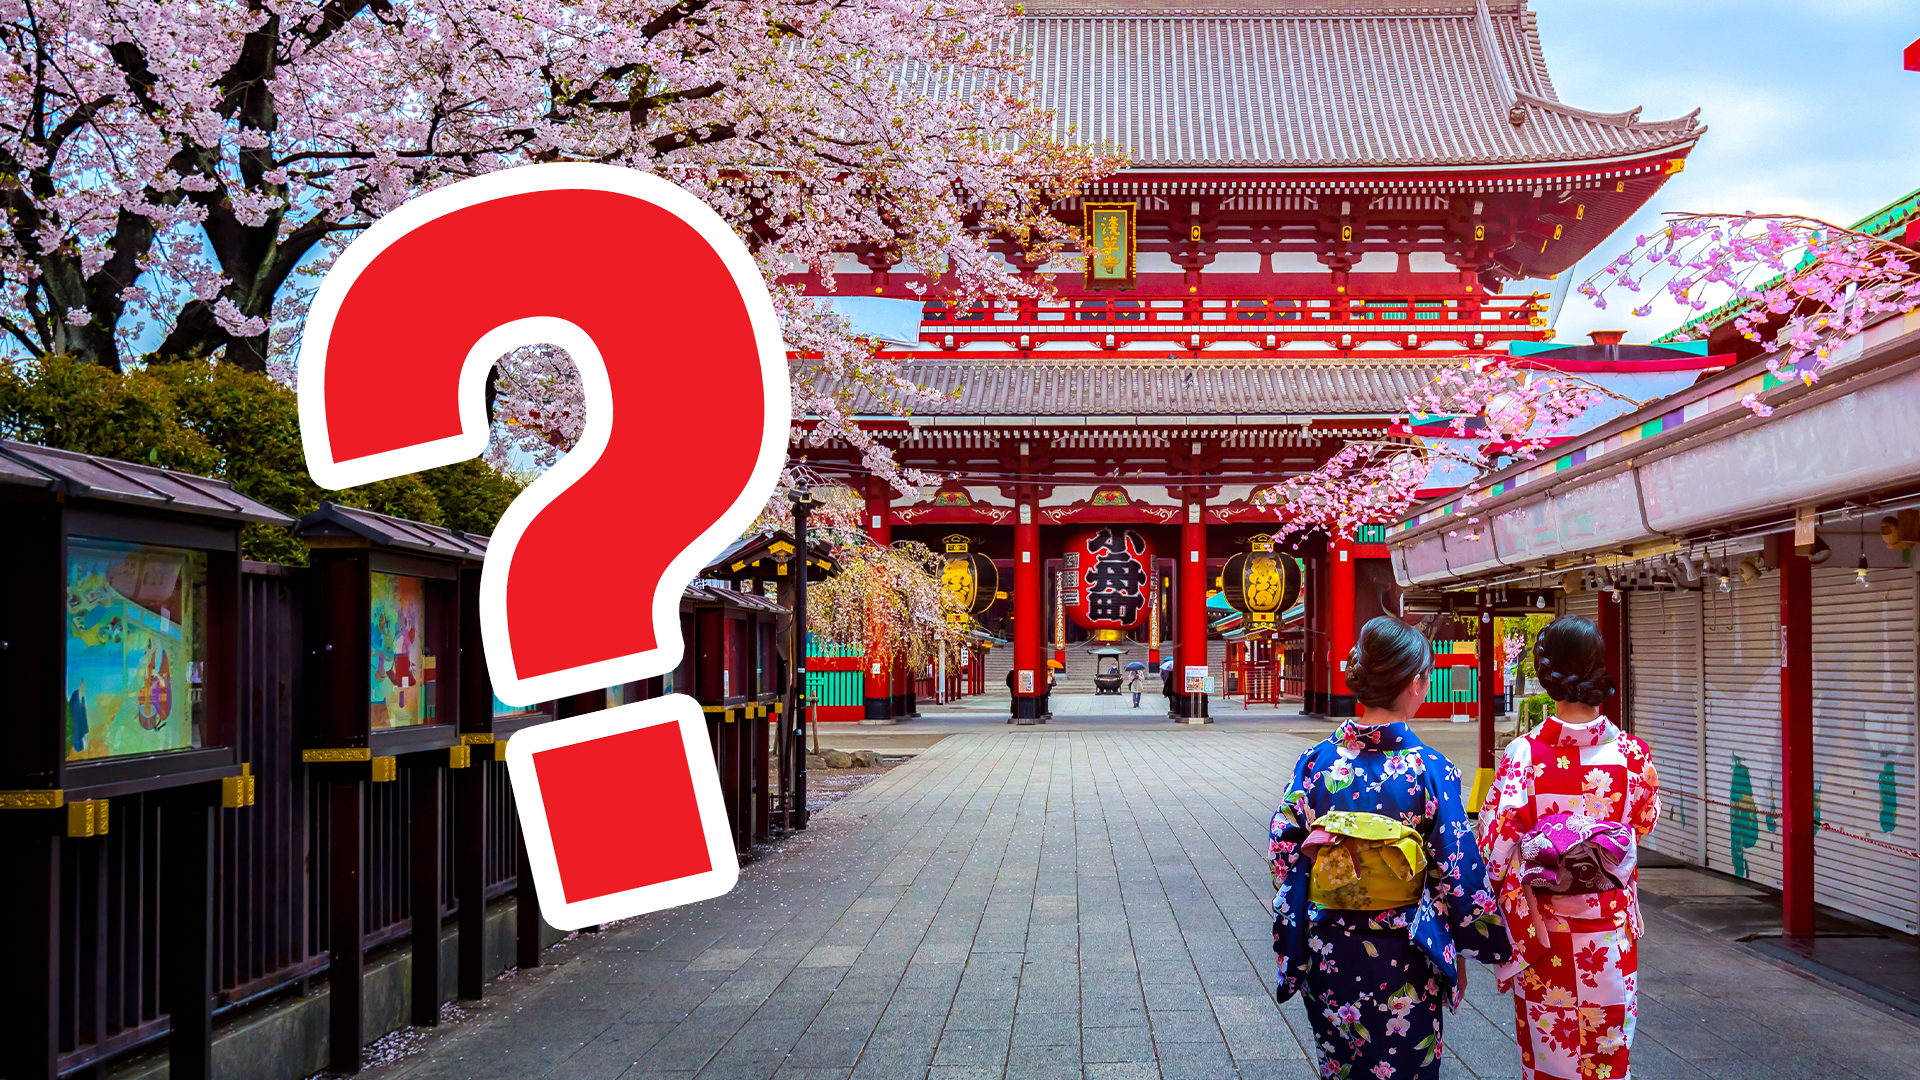 Japanese street with question mark 